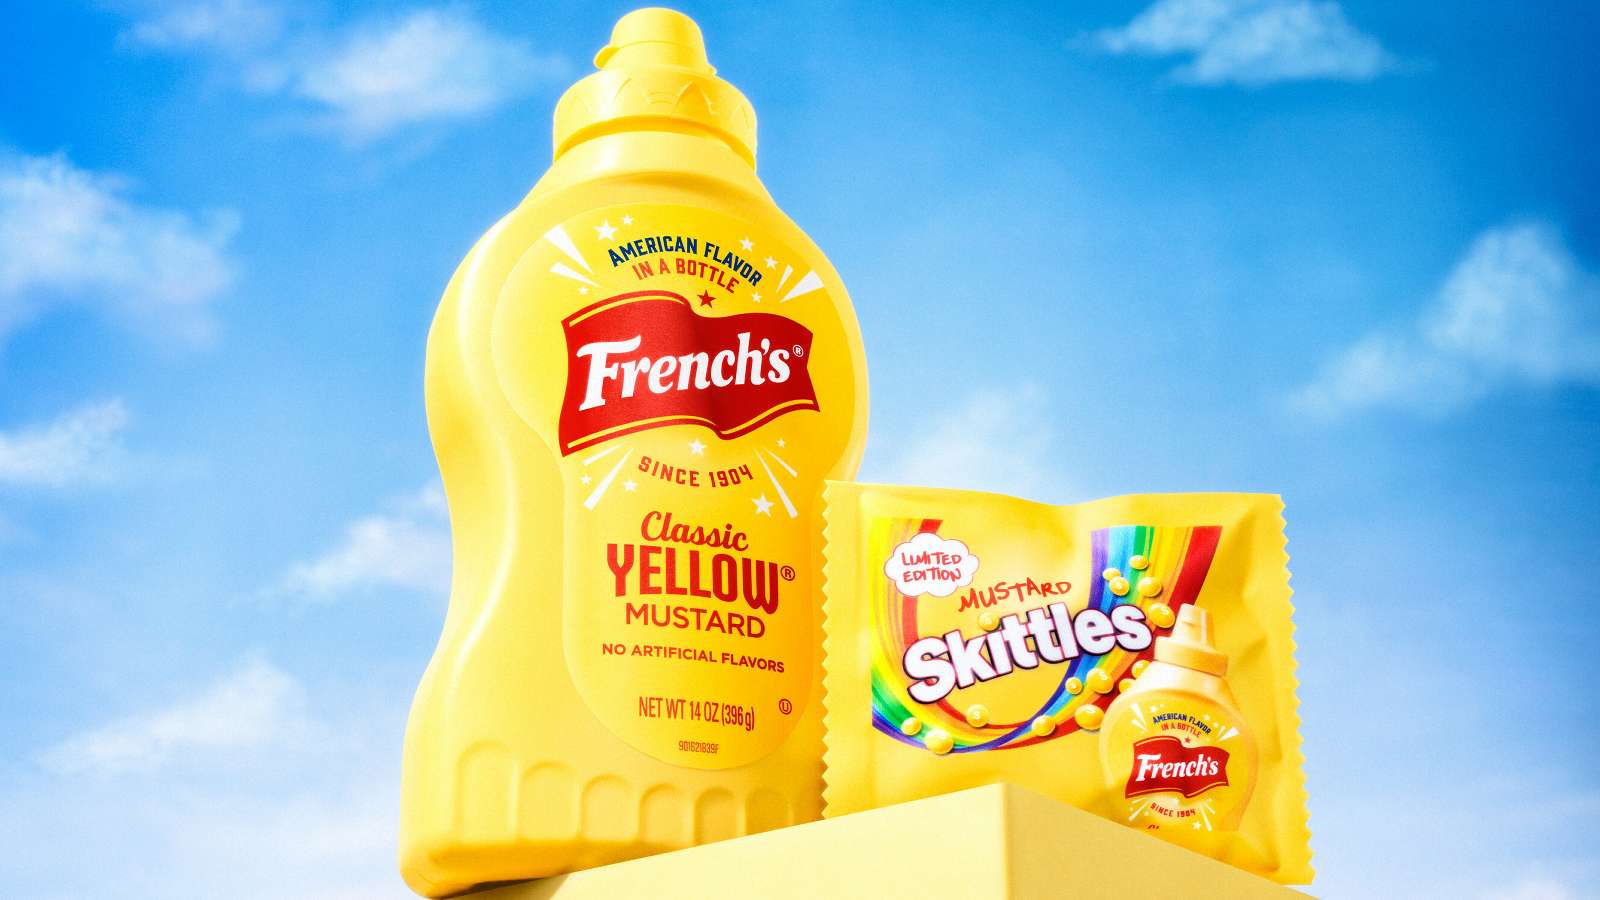 Skittles terrifies the internet by introducing new mustard flavor